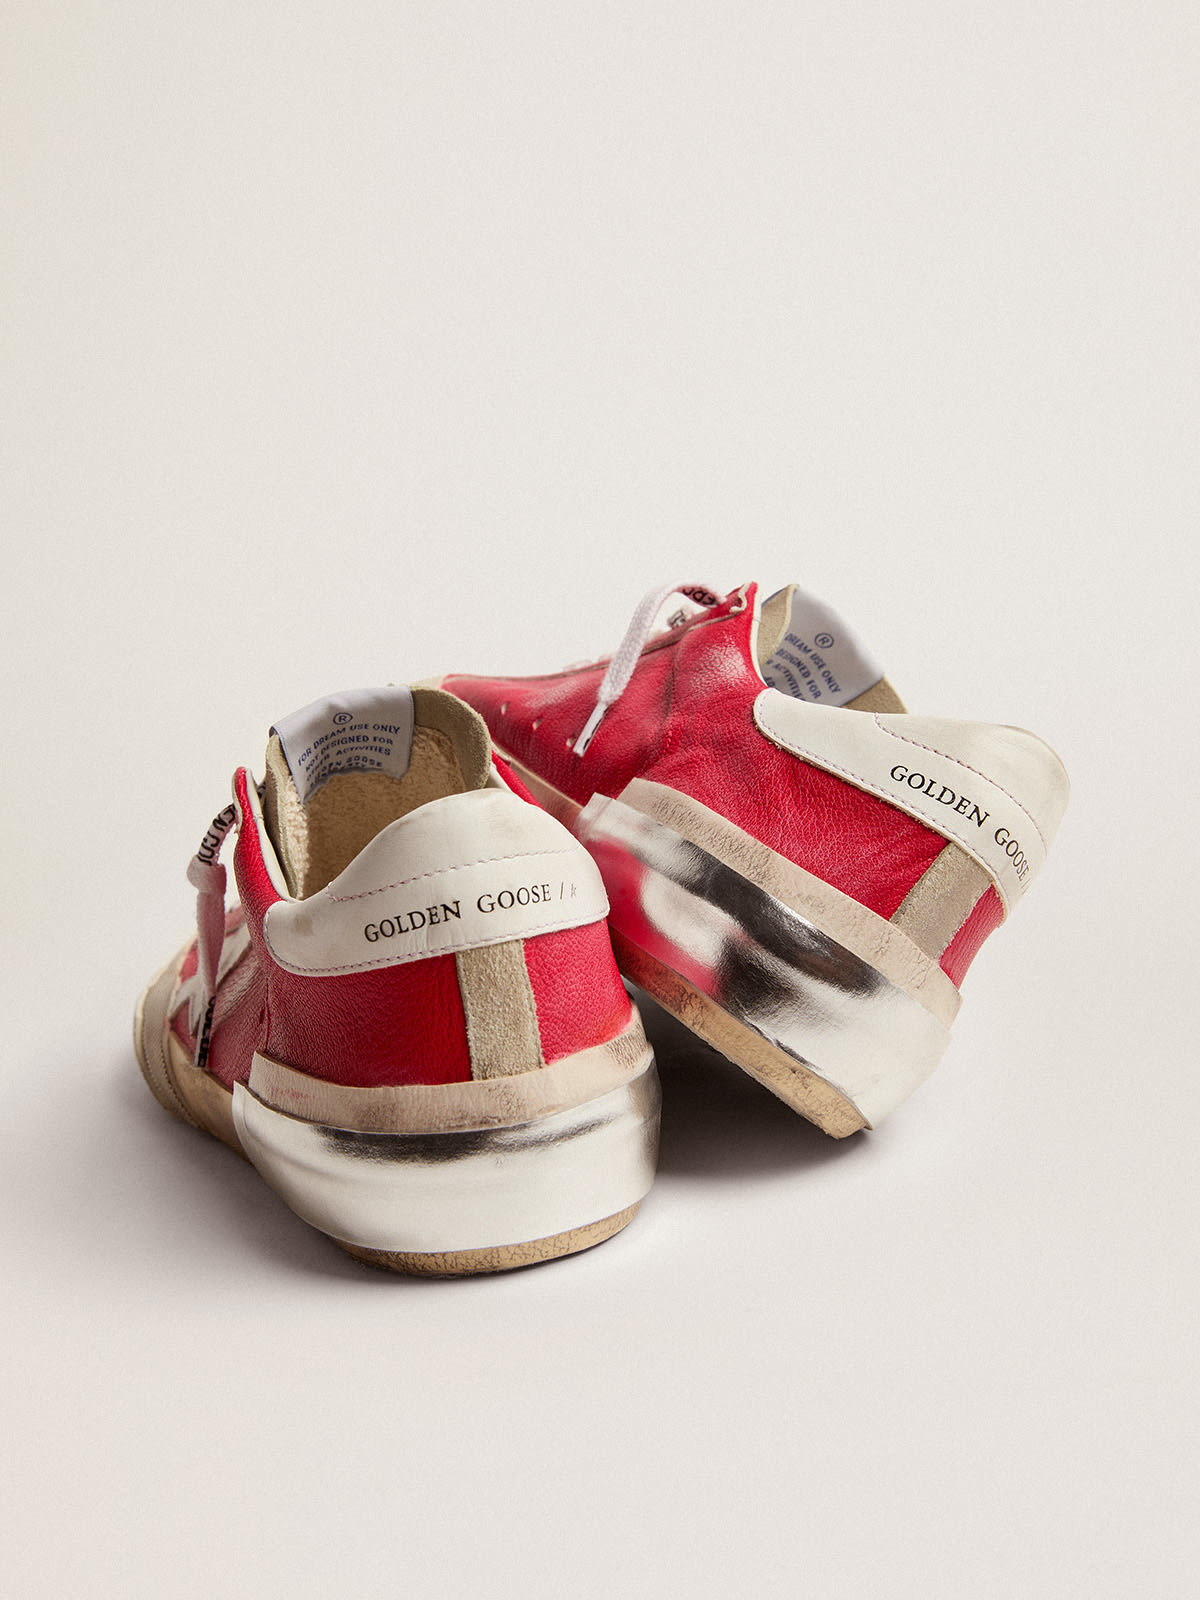 Golden Goose - Super-Star sneakers in red nappa leather with white leather star and heel tab in 